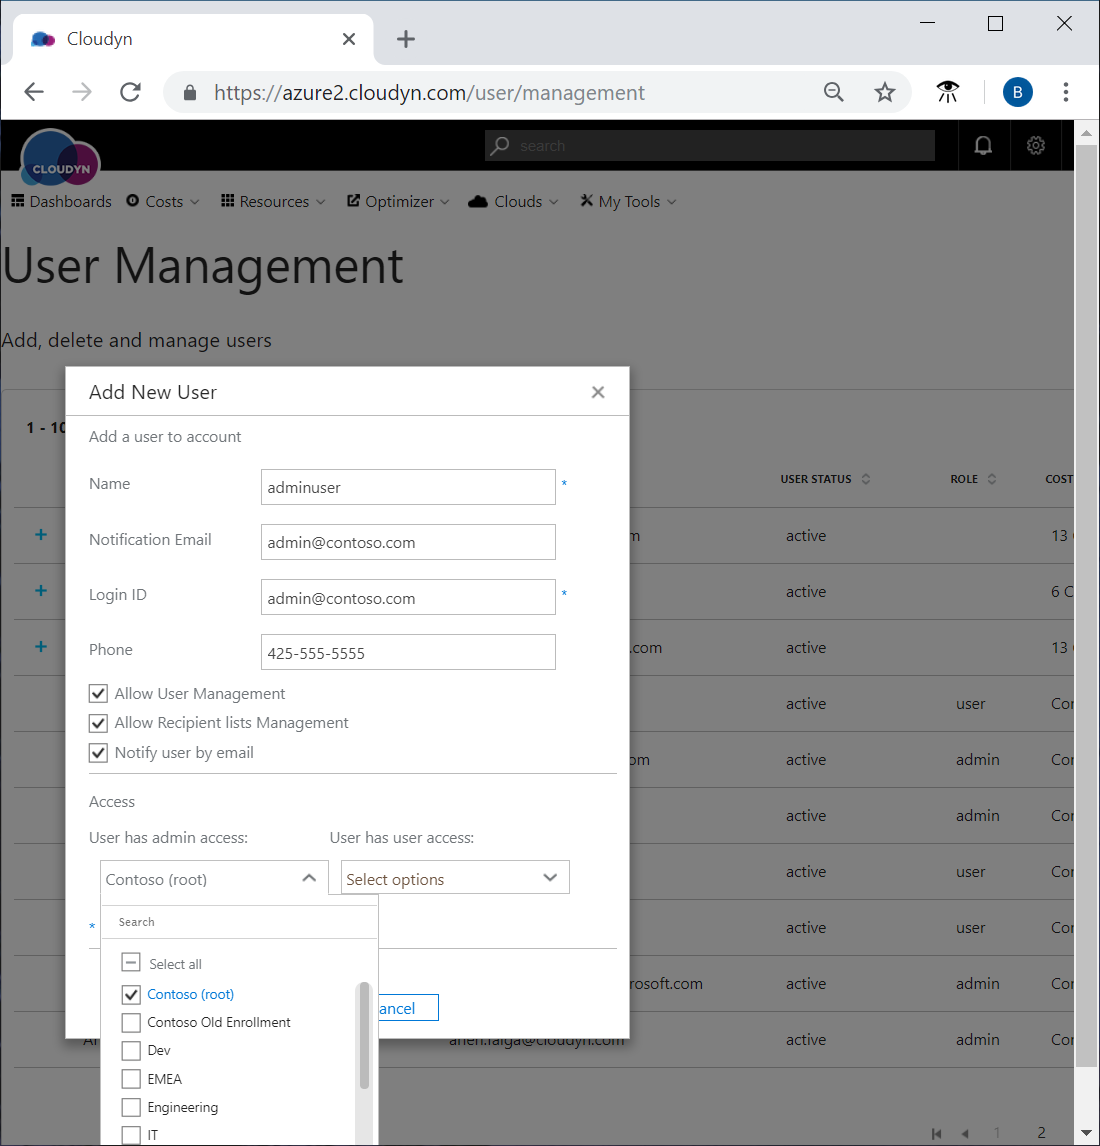 Example showing admin access in the Add new user box